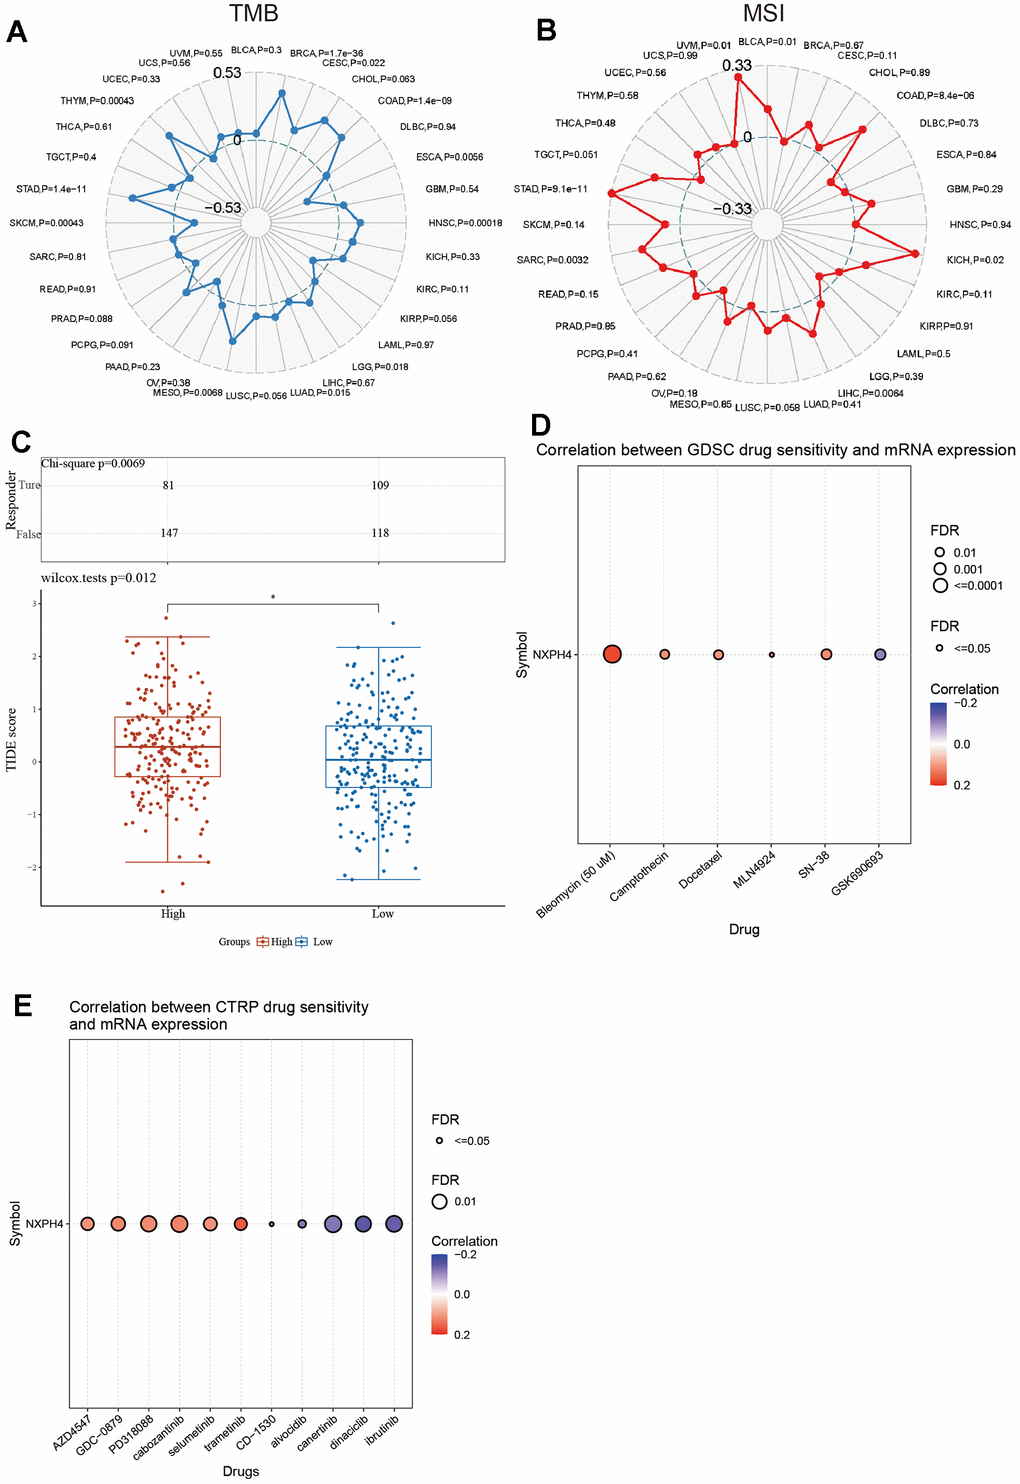 NXPH4 and drug sensitivity in colon cancer. (A) Relationship between NXPH4 and TMB in colon cancer. (B) Relationship between NXPH4 and MSI in colon cancer. (C) Difference of TIDE score between high and low NXPH4 expression groups in colon cancer. (D) GSCA online tool was used to analyze the correlation between NXPH4 expression and chemotherapeutic drug IC50 in GDSC database. (E) GSCA online tool to analyze the correlation between NXPH4 expression and chemotherapy drug IC50 in CTRP database.